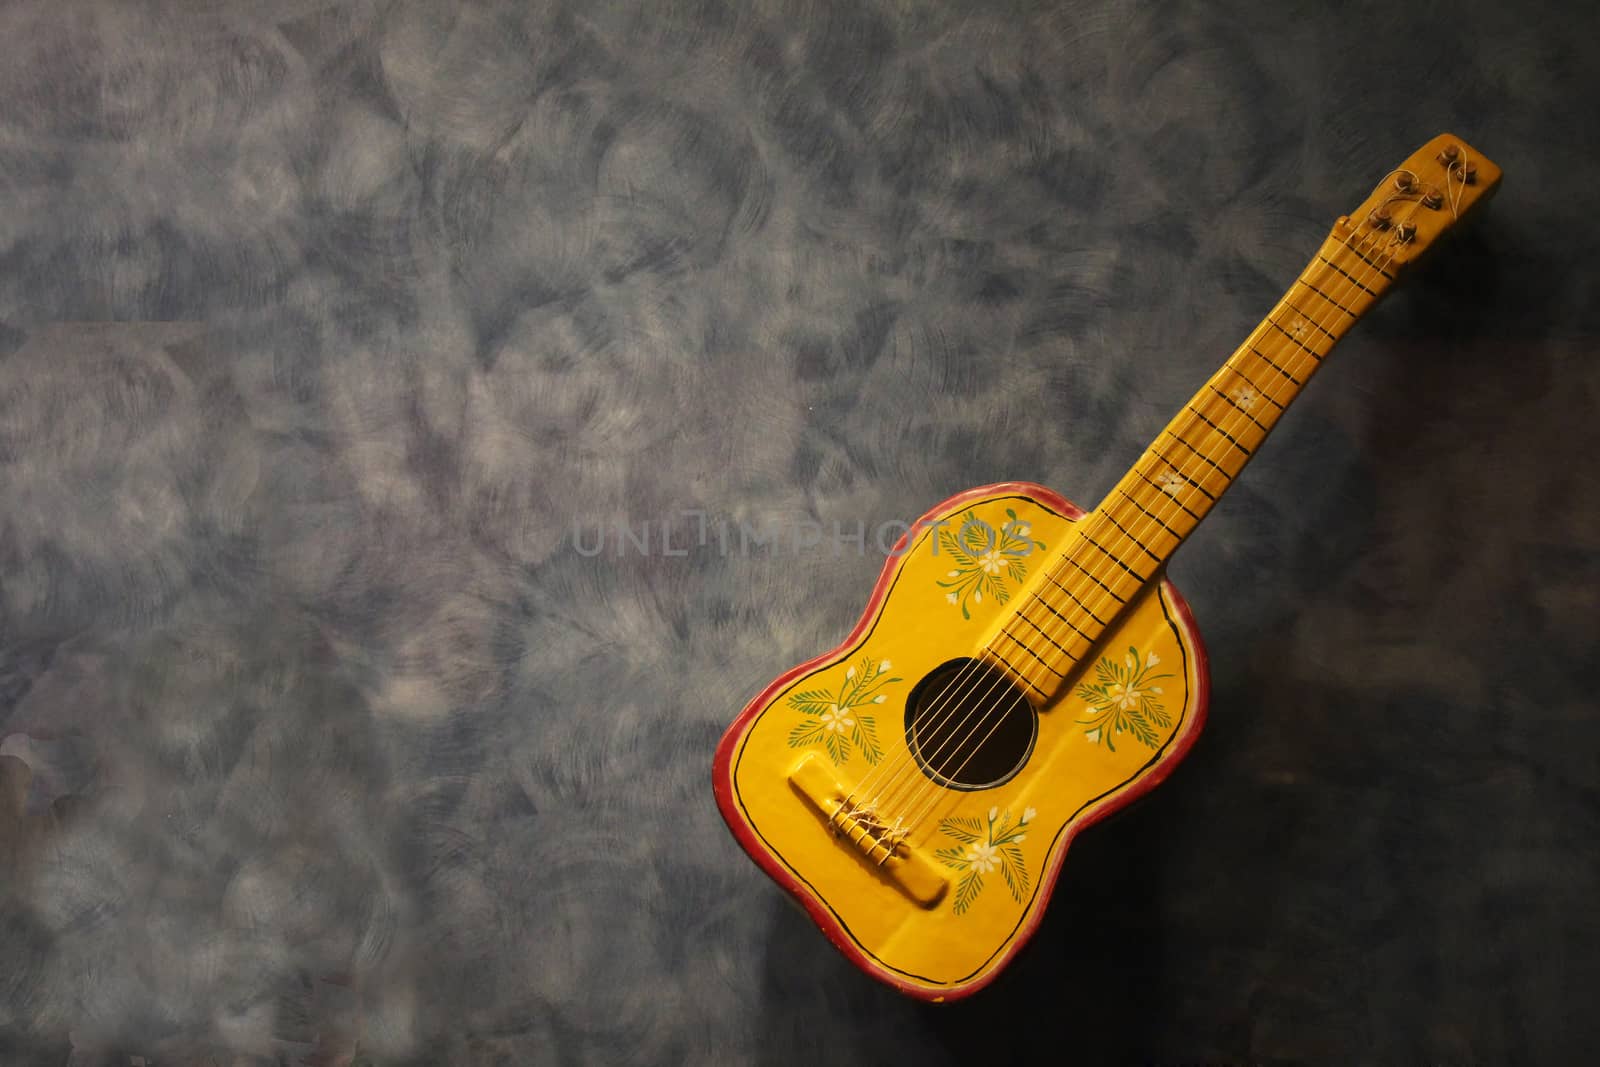 Spanish guitar toy on a gray background by JRPazos